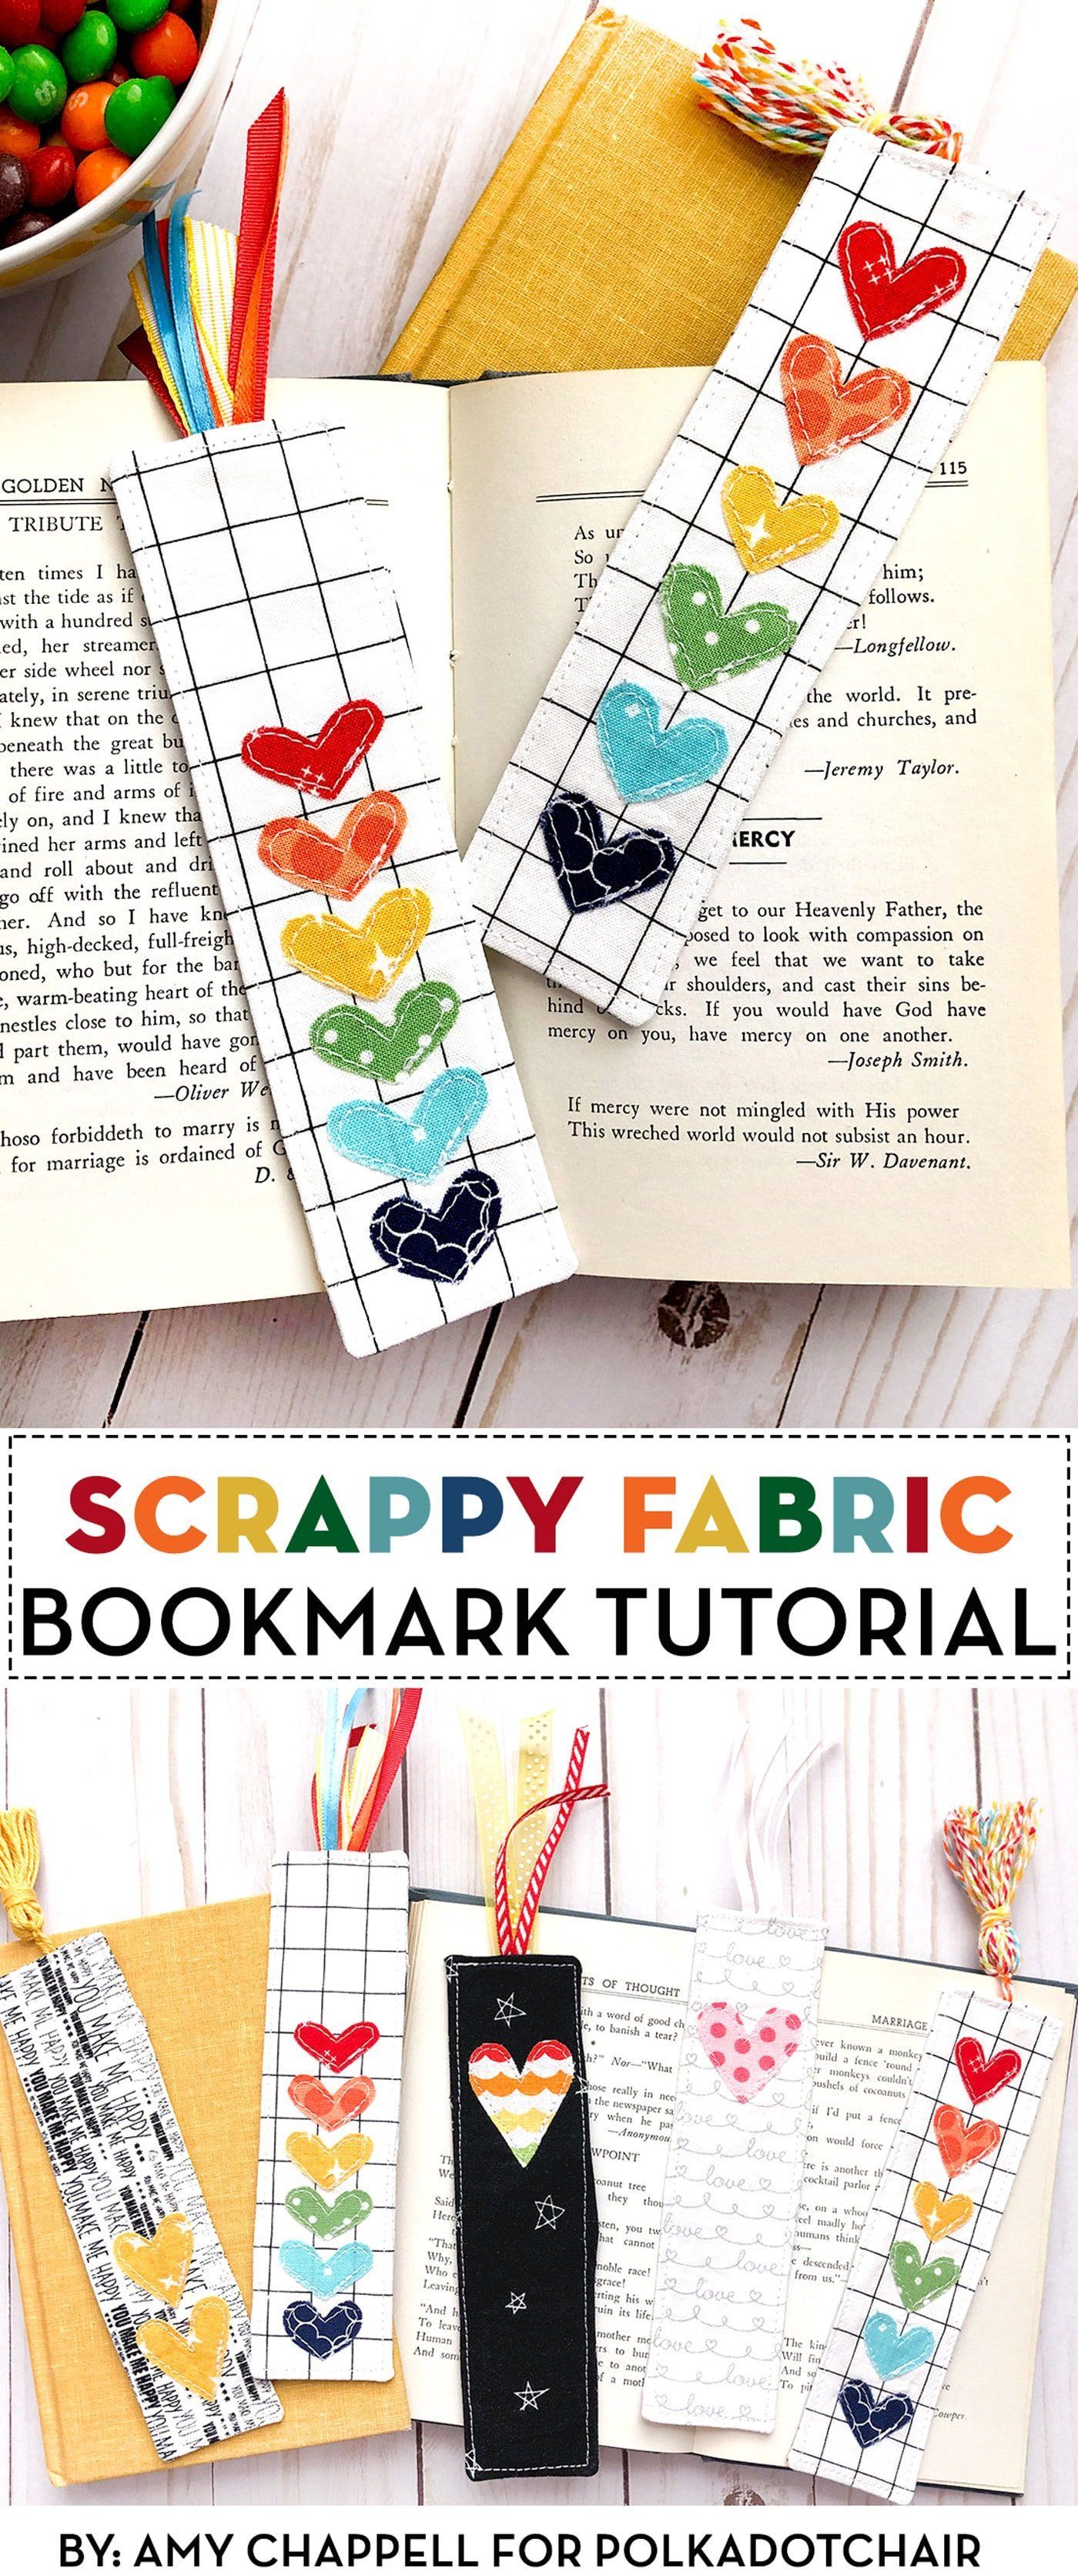 Scrappy Fabric Bookmark Tutorial | The Polka Dot Chair -   16 fabric crafts For Kids tips ideas